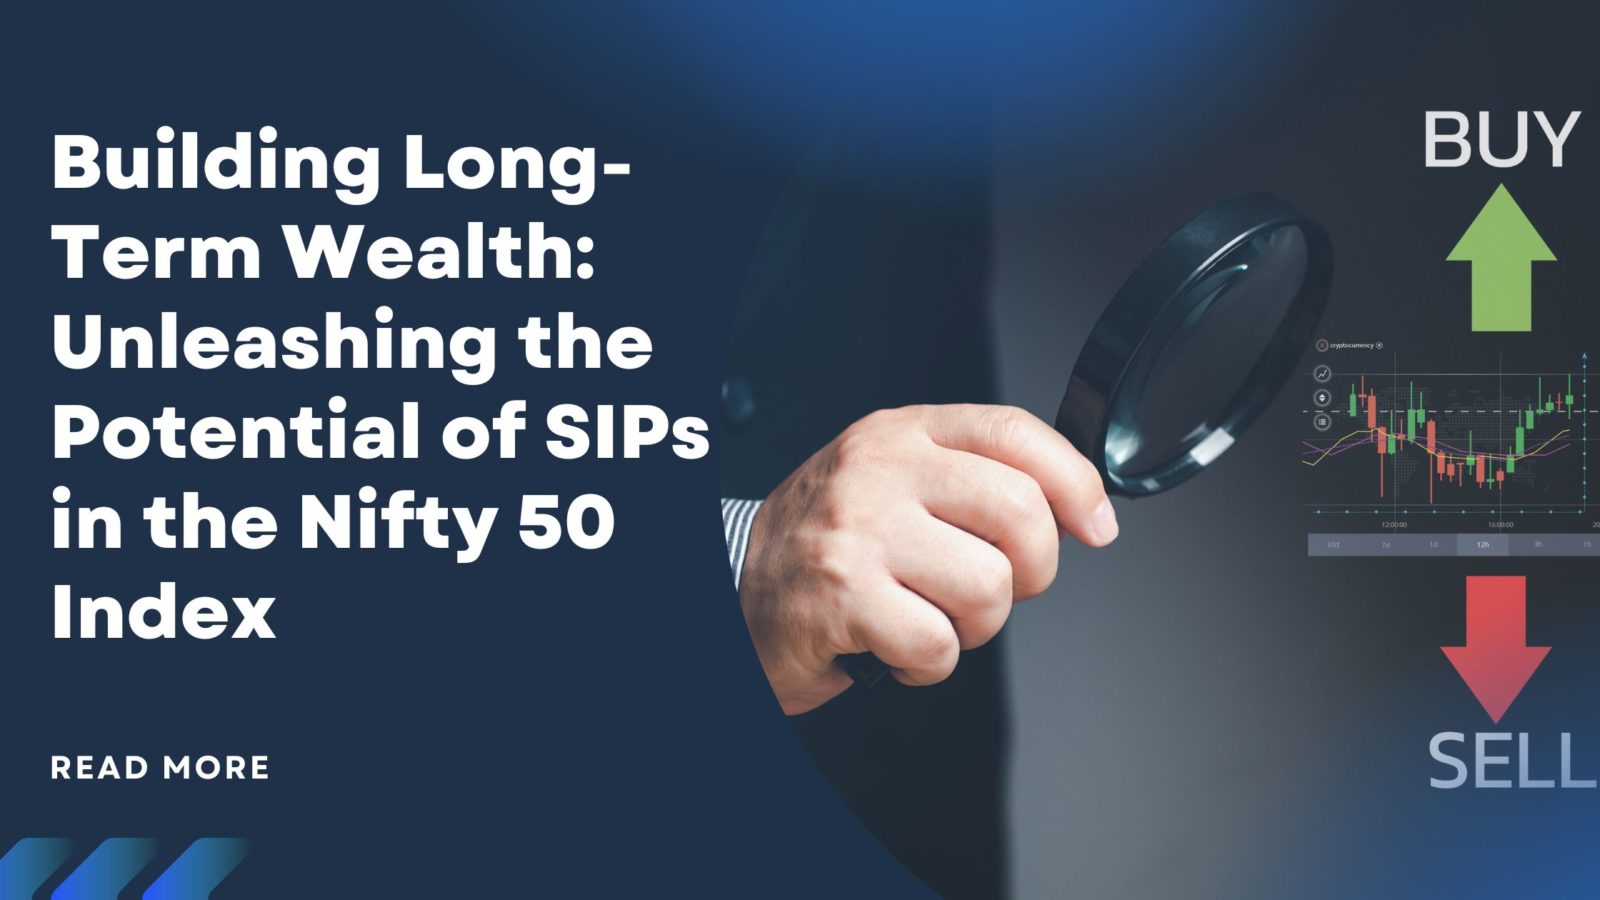 Harnessing the Power of the Nifty 50 Investment Essentials